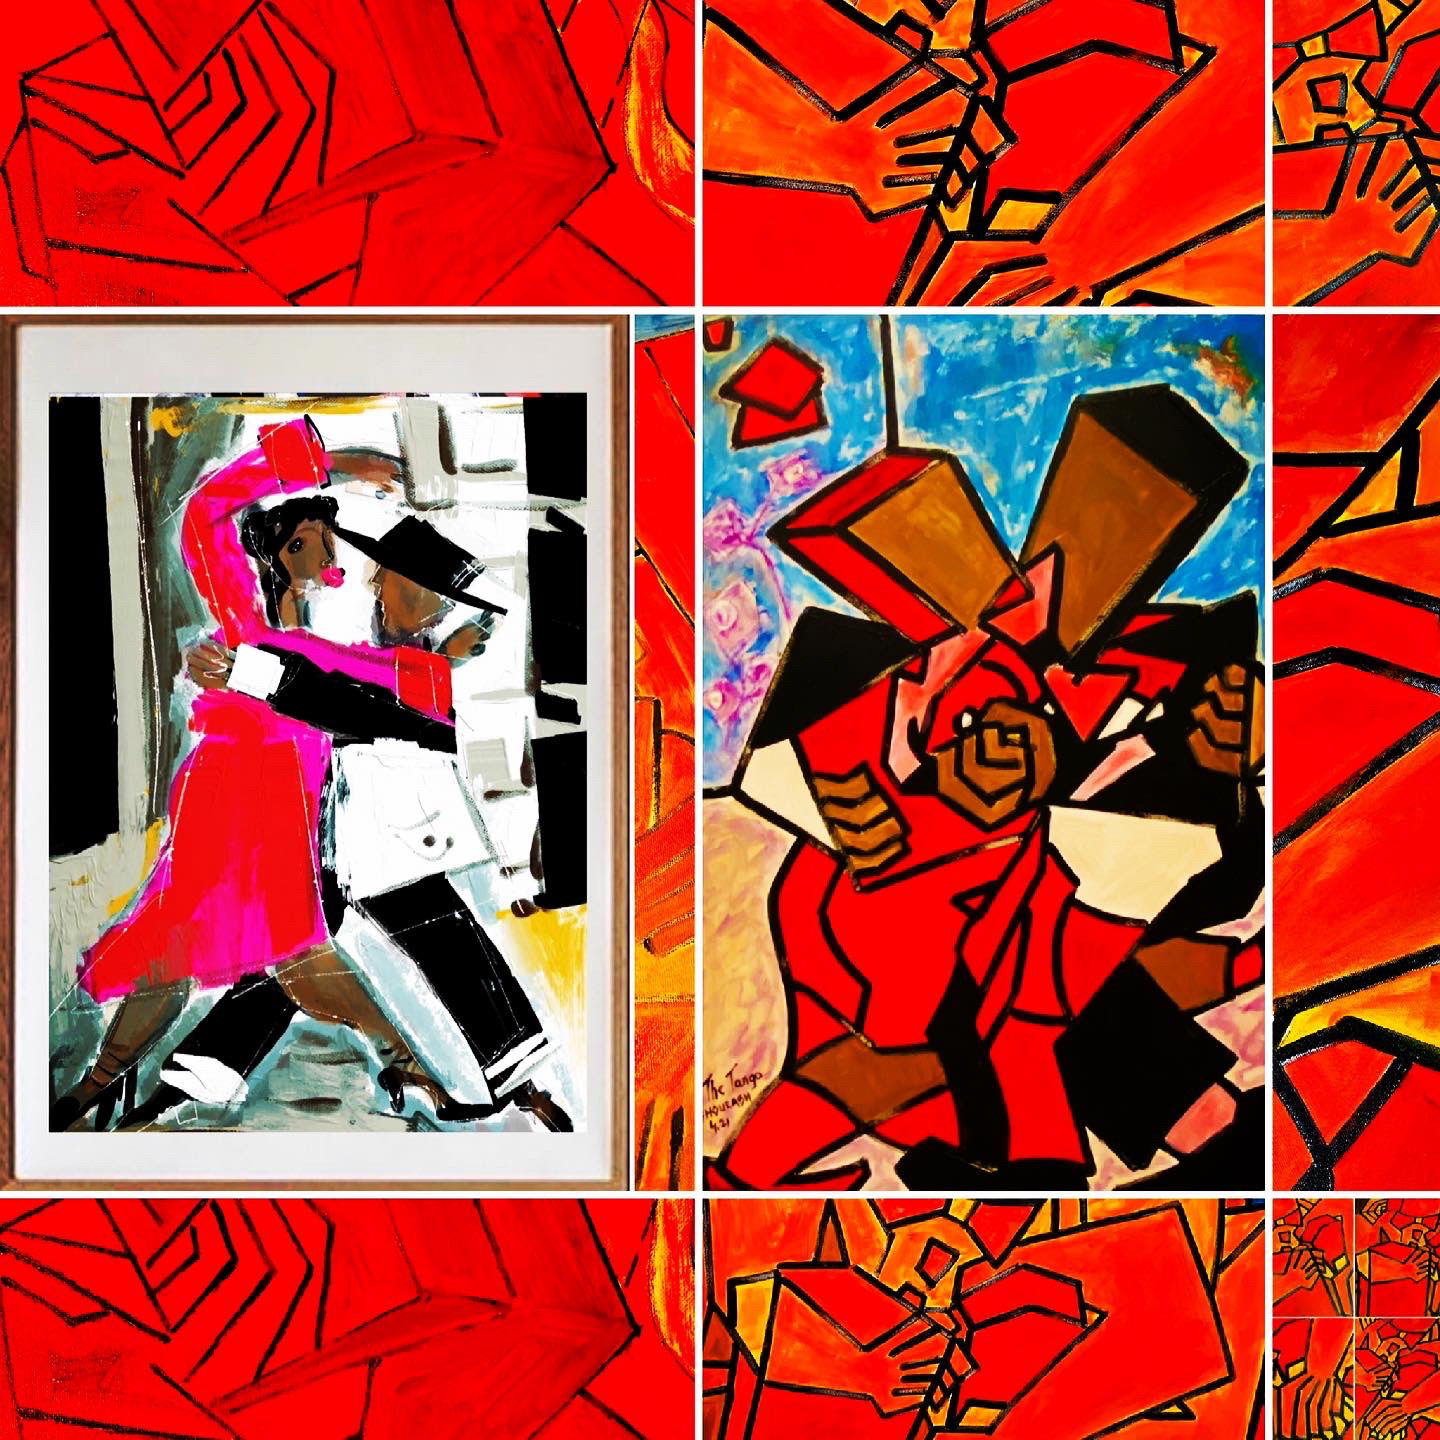 Tango dance form in acrylic painting